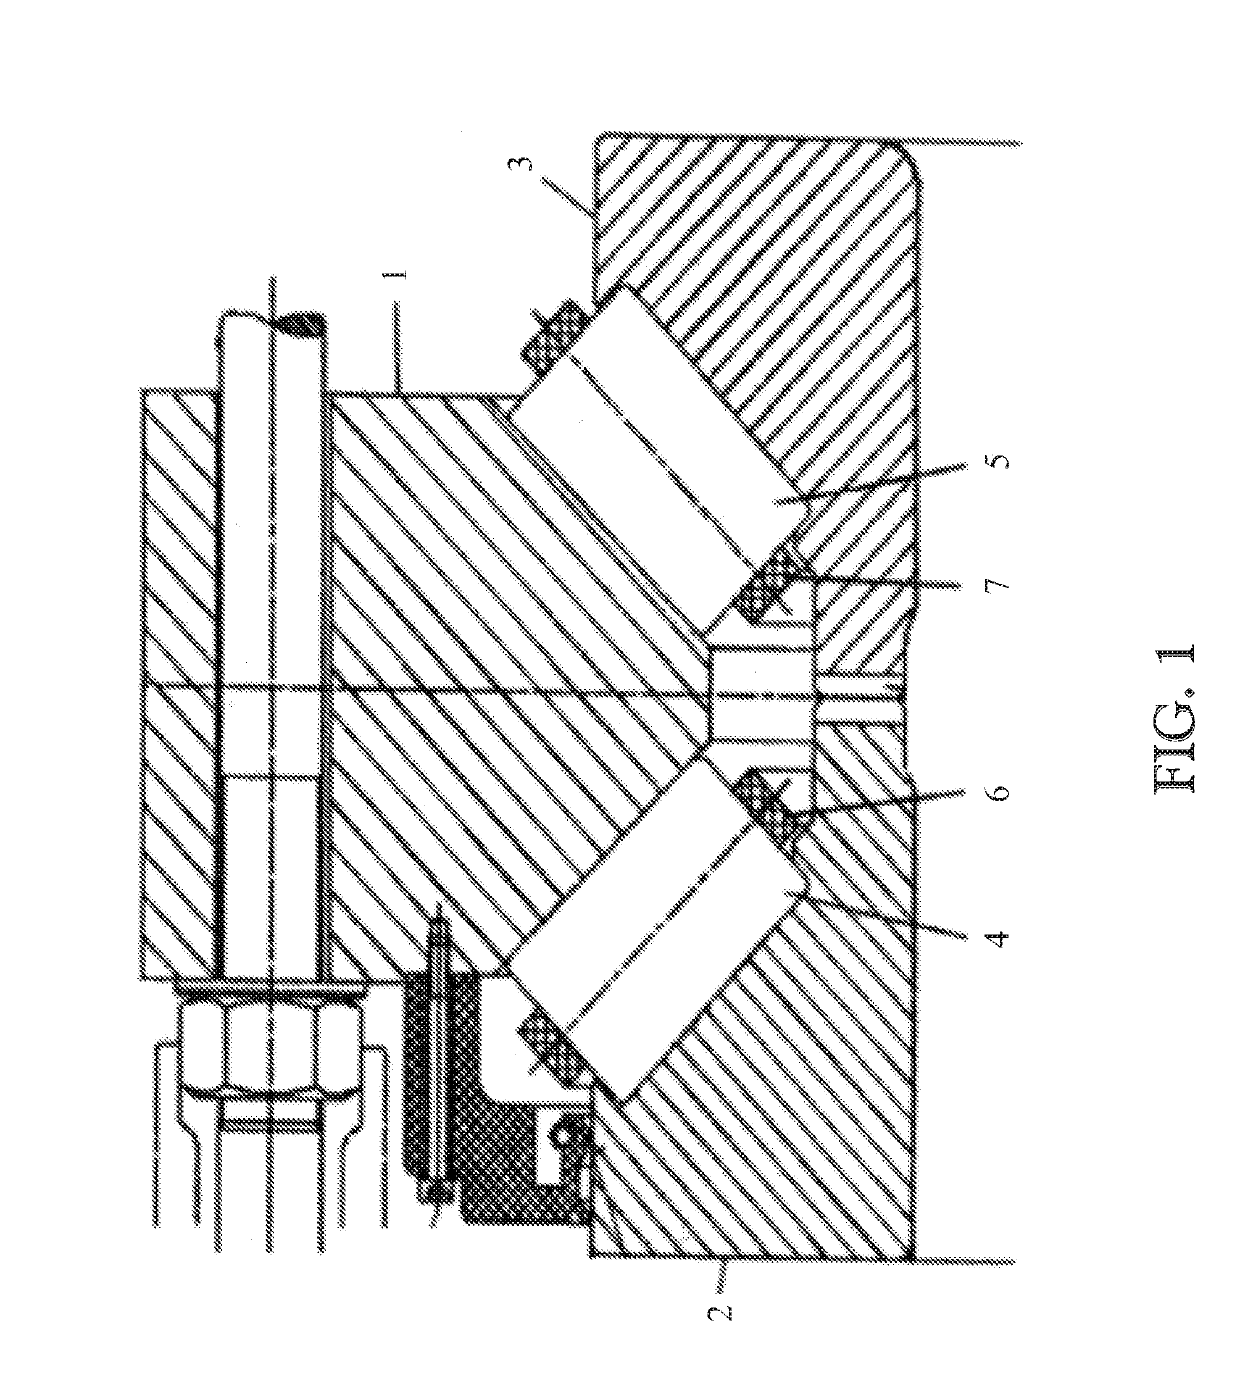 Roller with integrated load detection